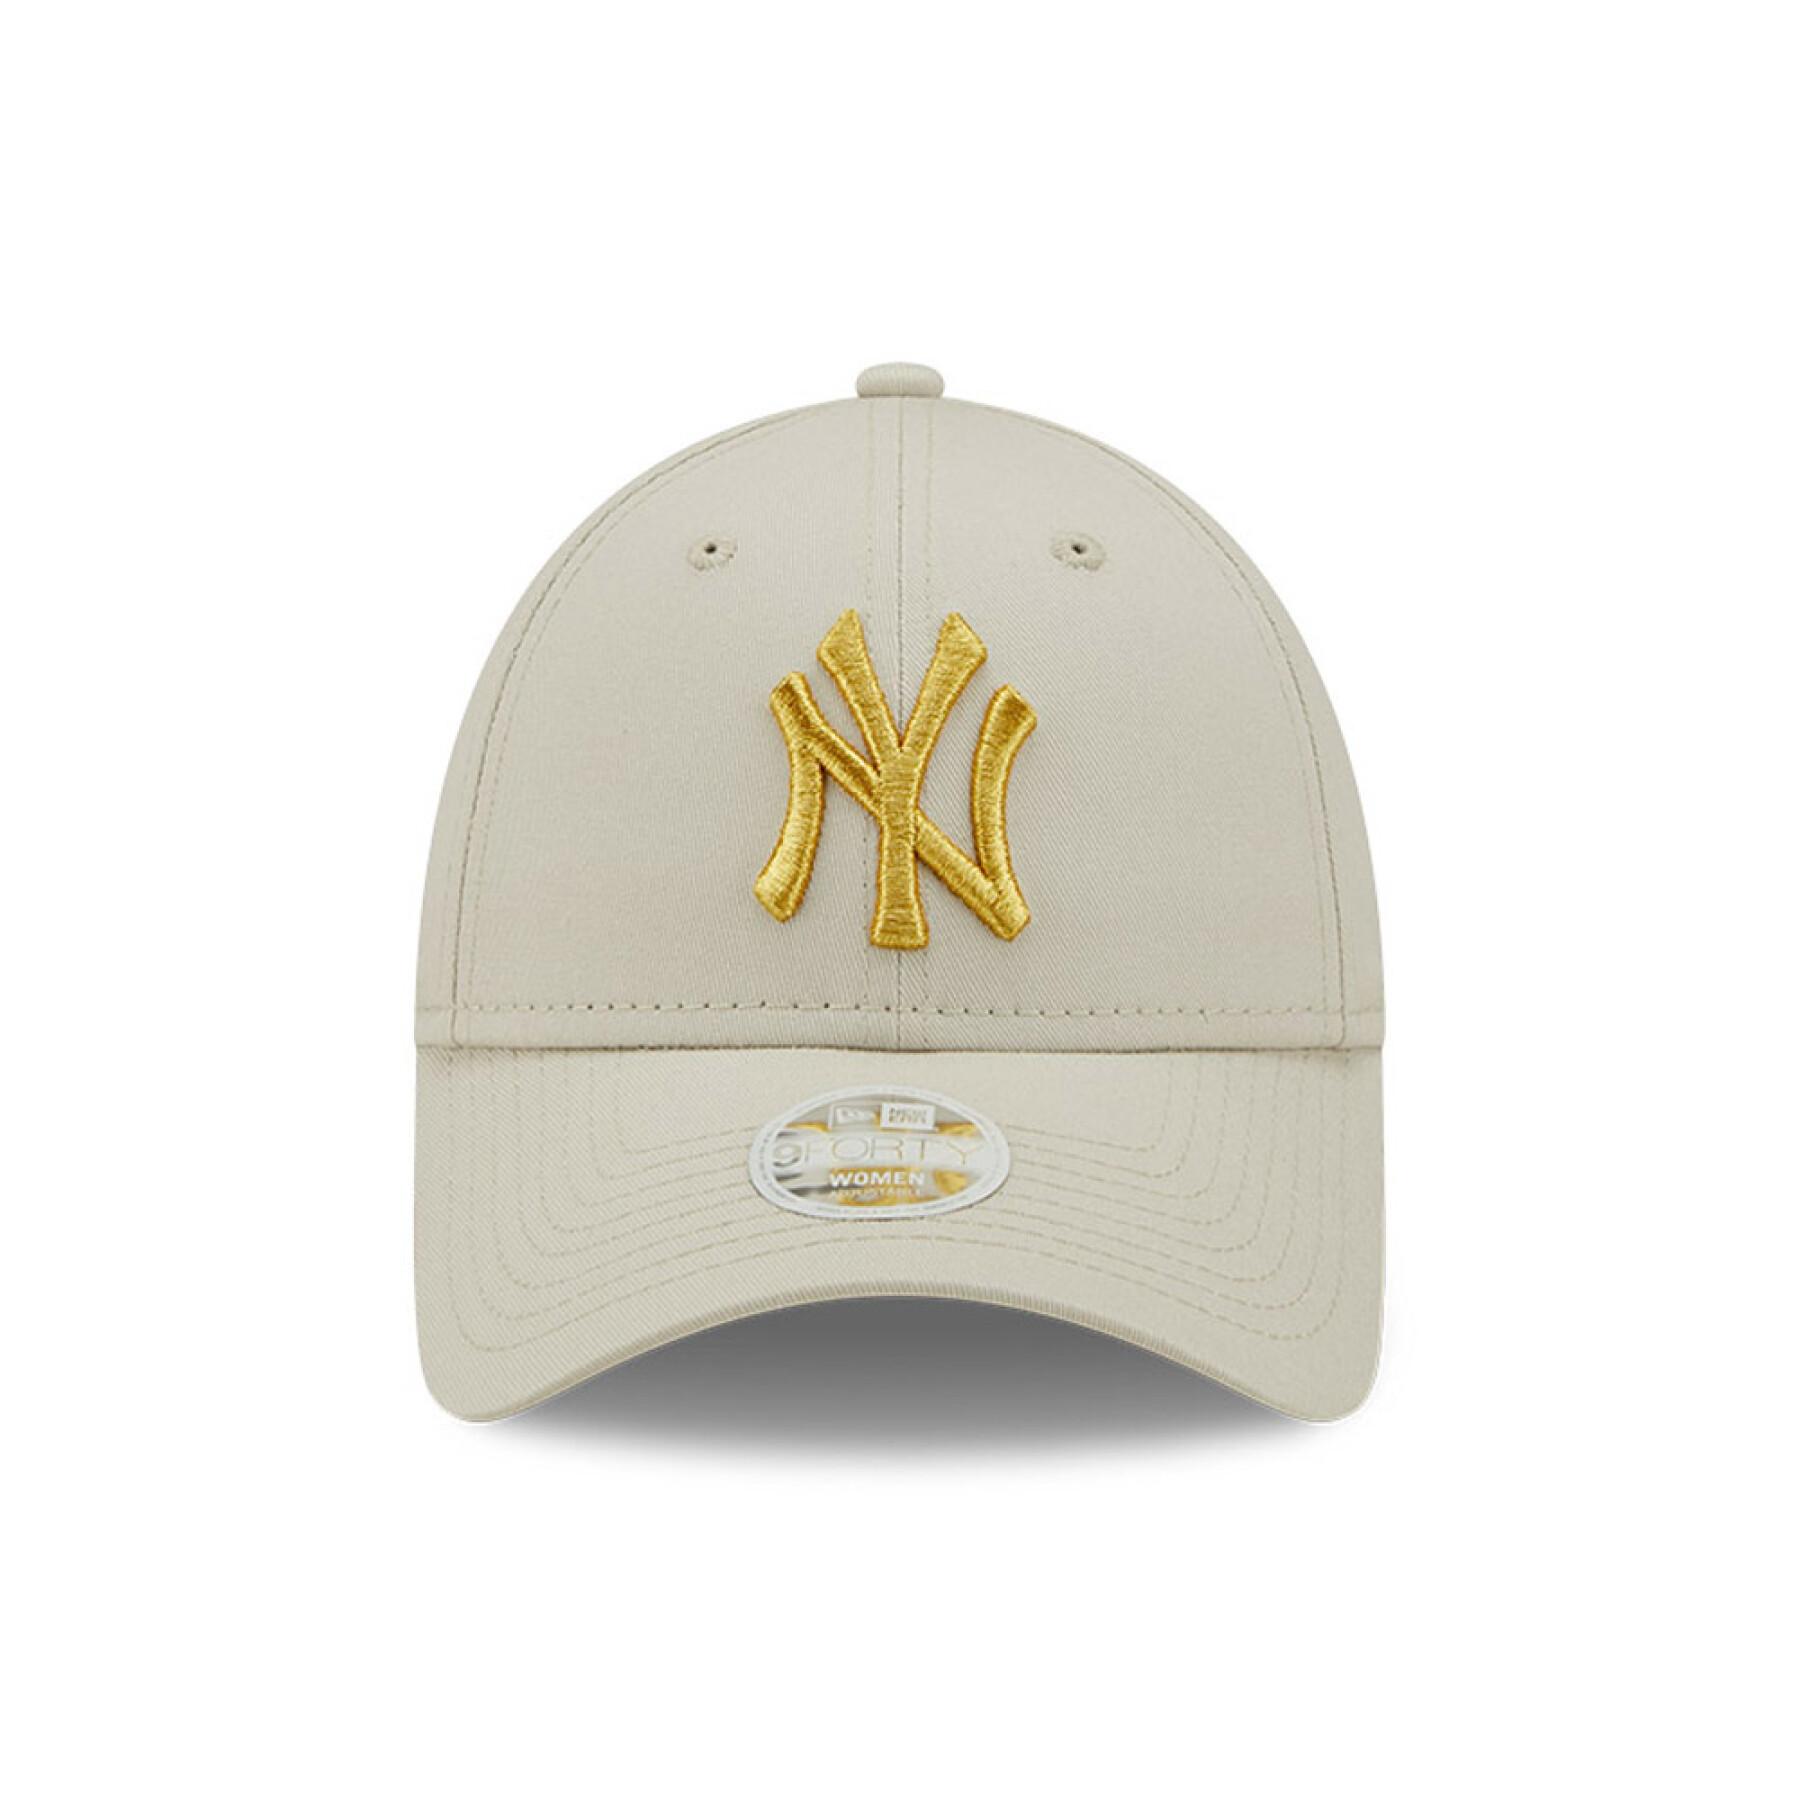 Casquette 9Forty femme New York Yankees